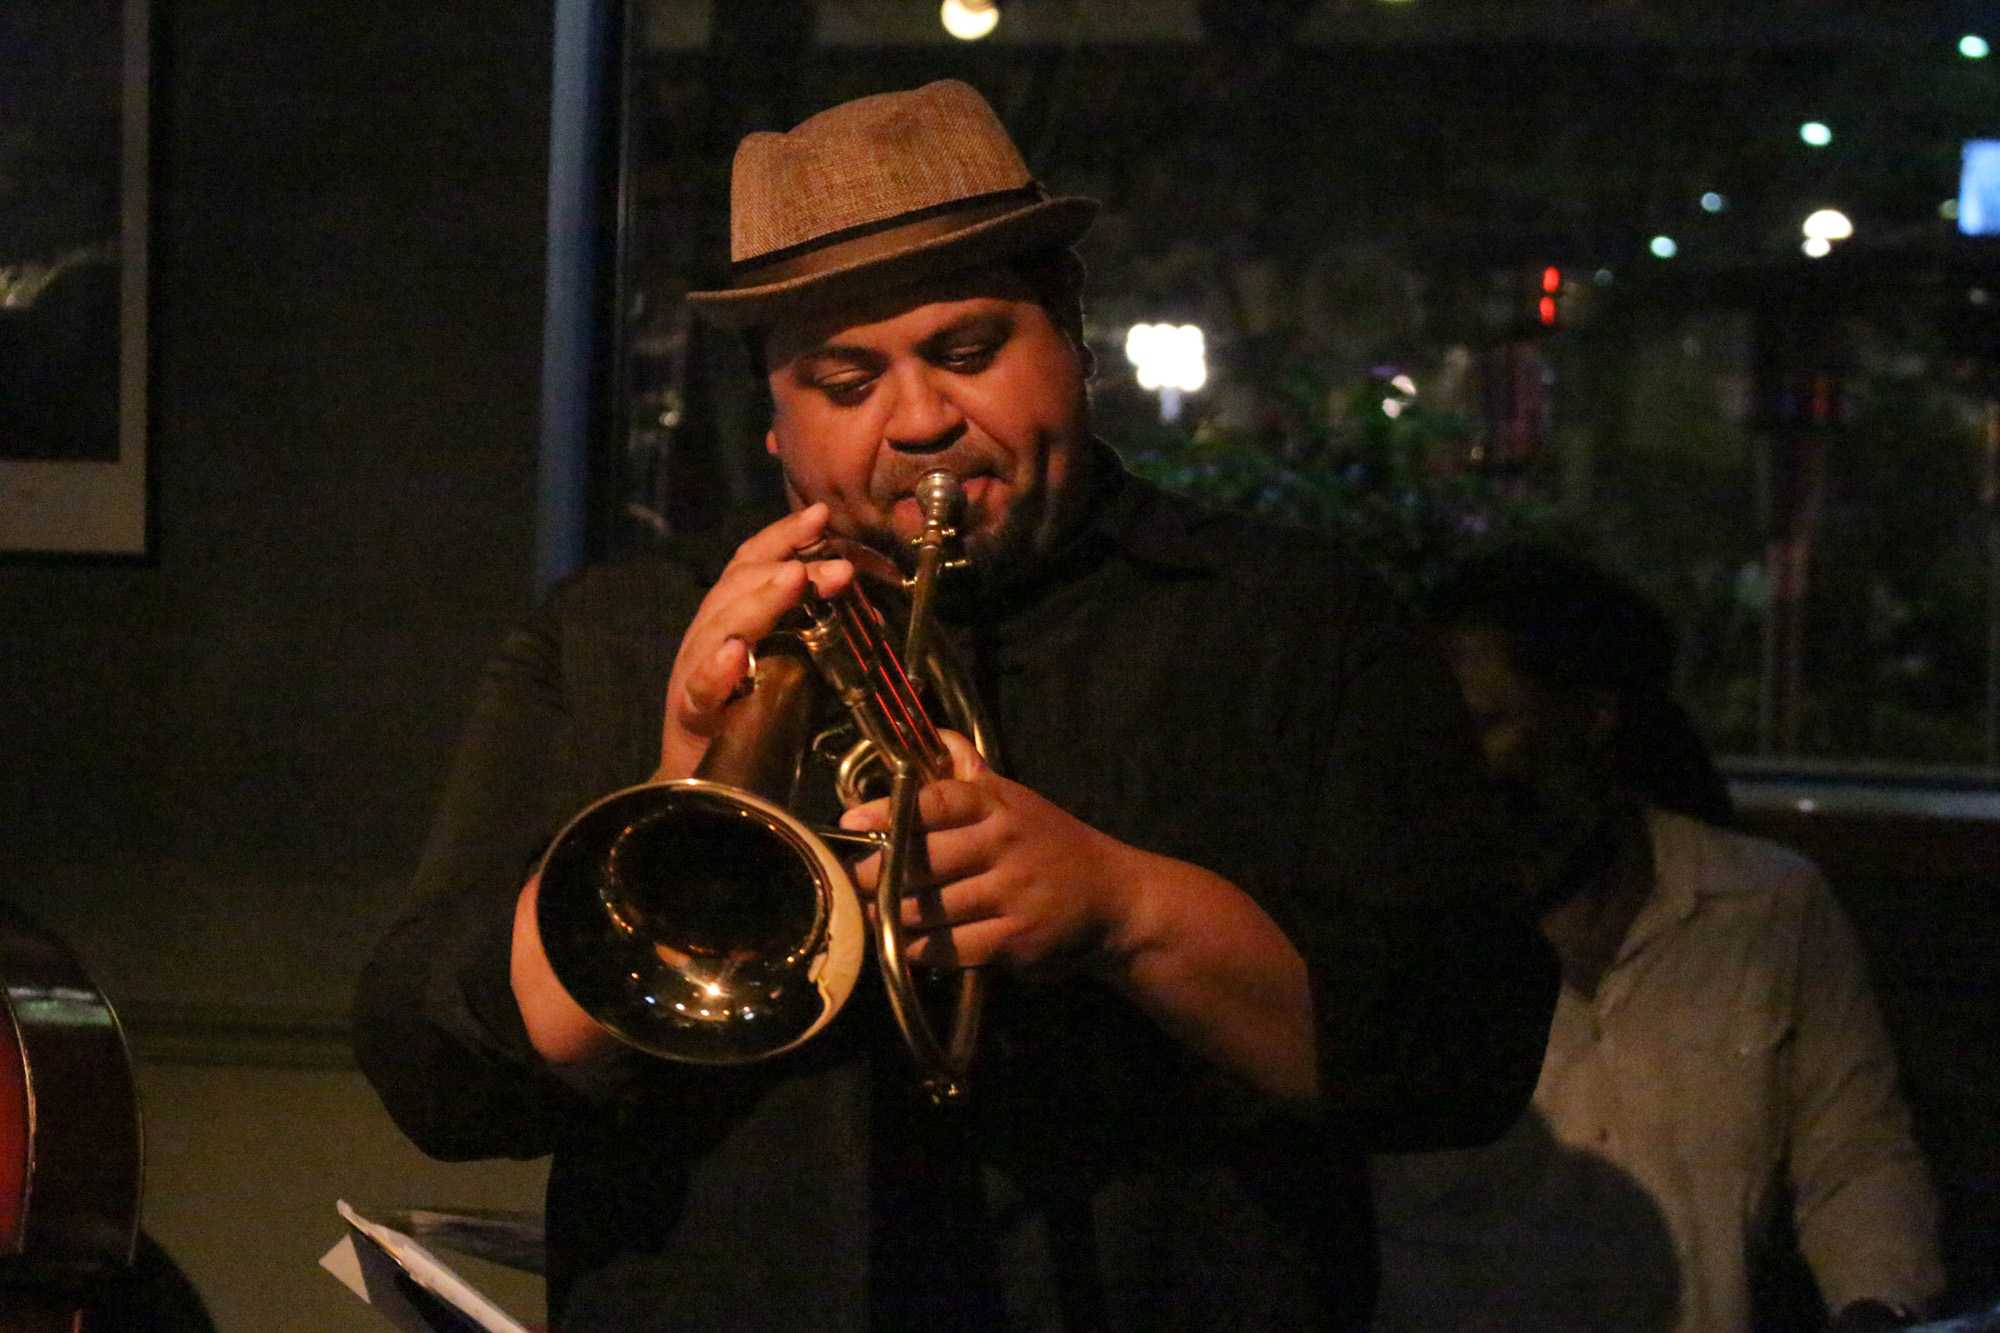 Jazz performance showcases impact of music during Brazil's military ...